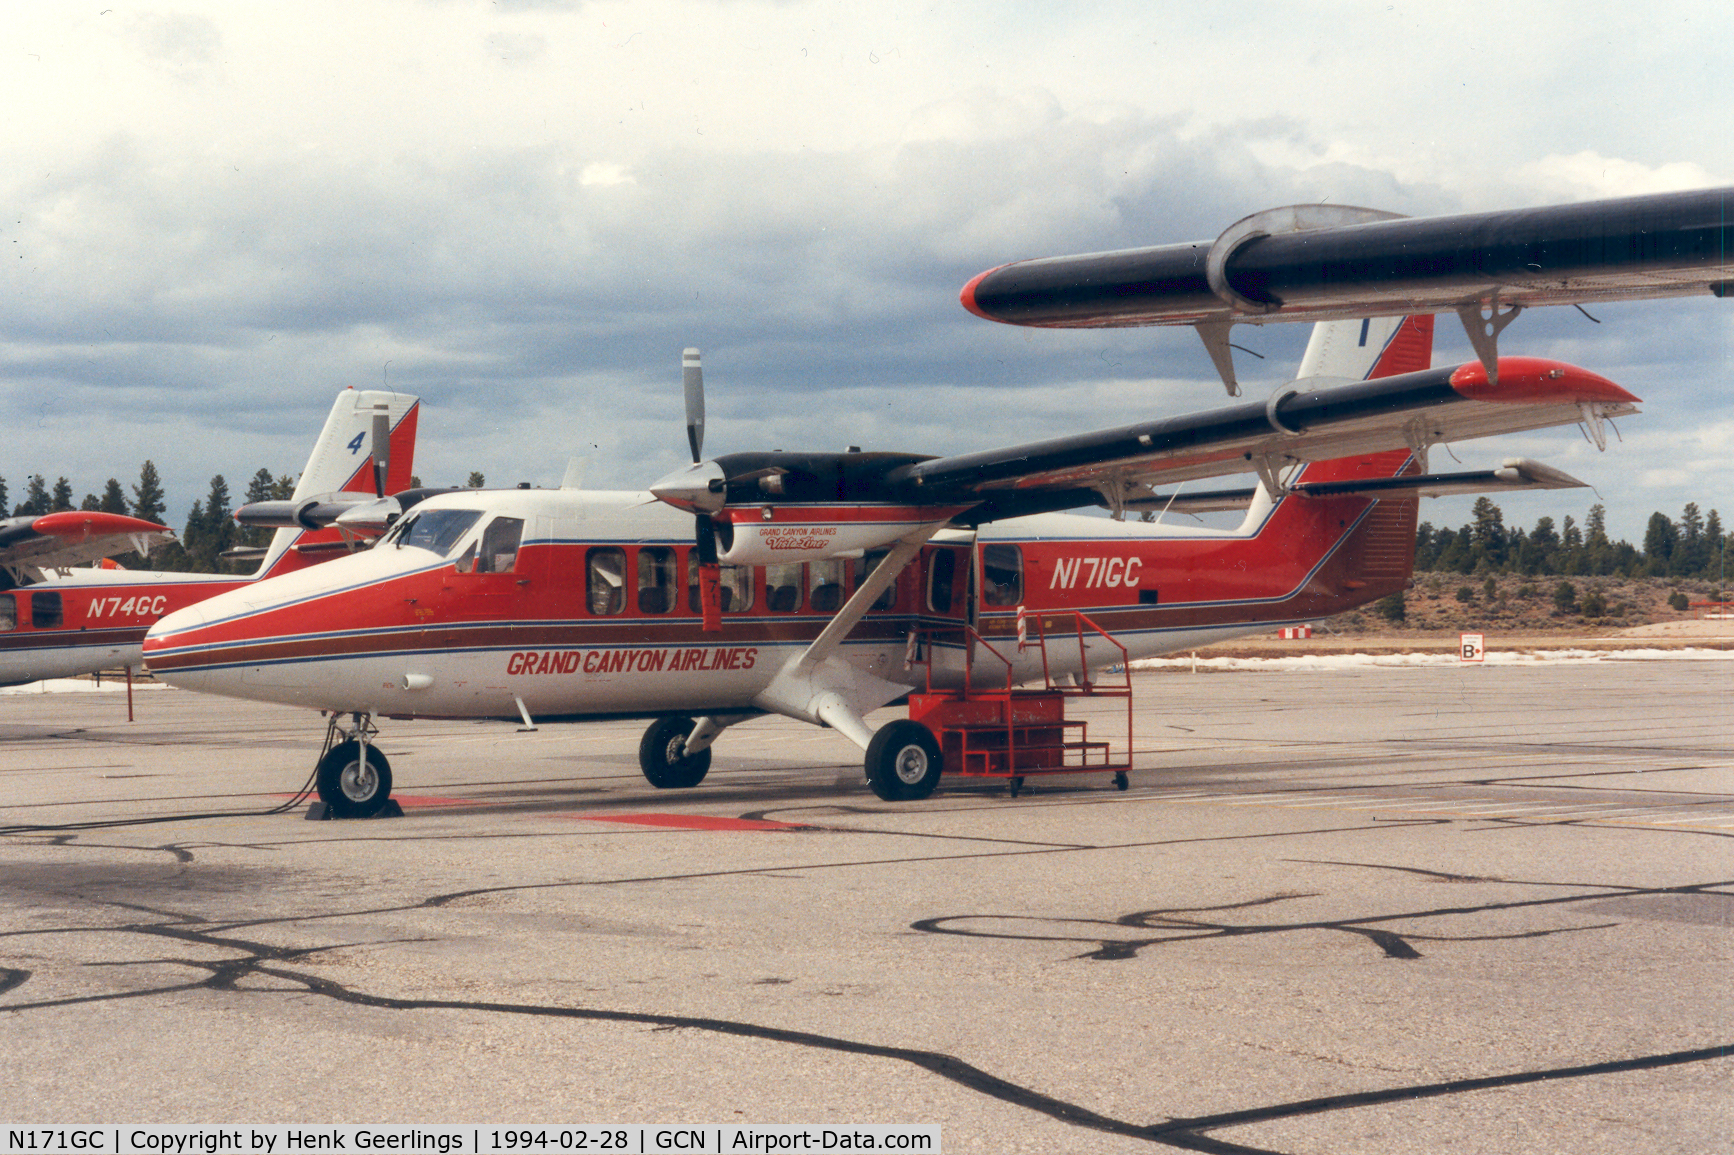 N171GC, 1974 De Havilland Canada DHC-6-300 Twin Otter C/N 406, Grand Canyon Airlines , Vistaliner